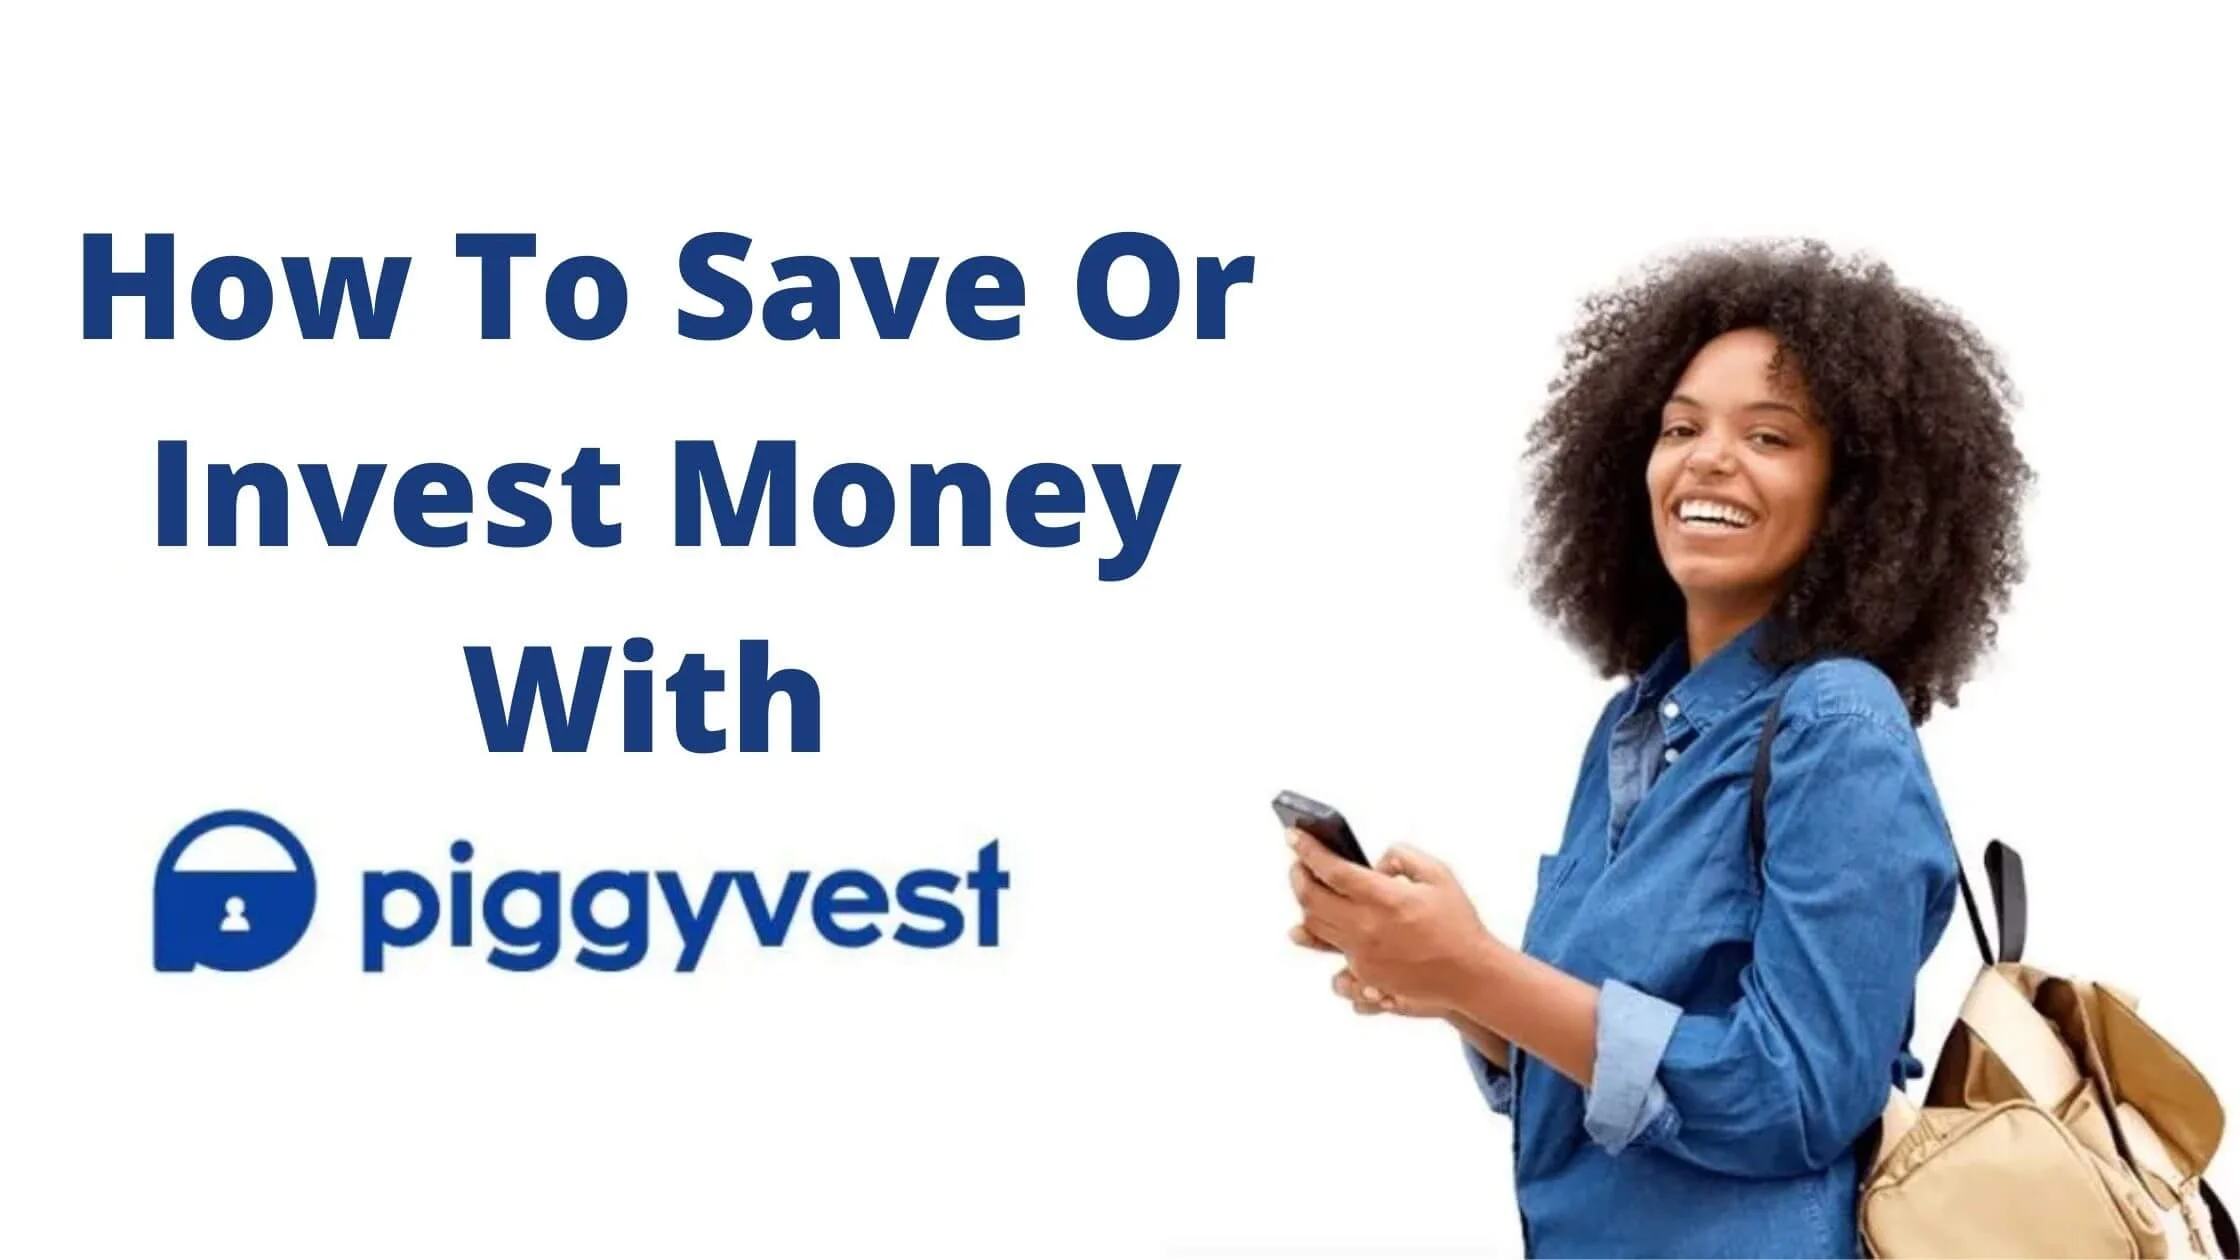 How To Save Or Invest Money With